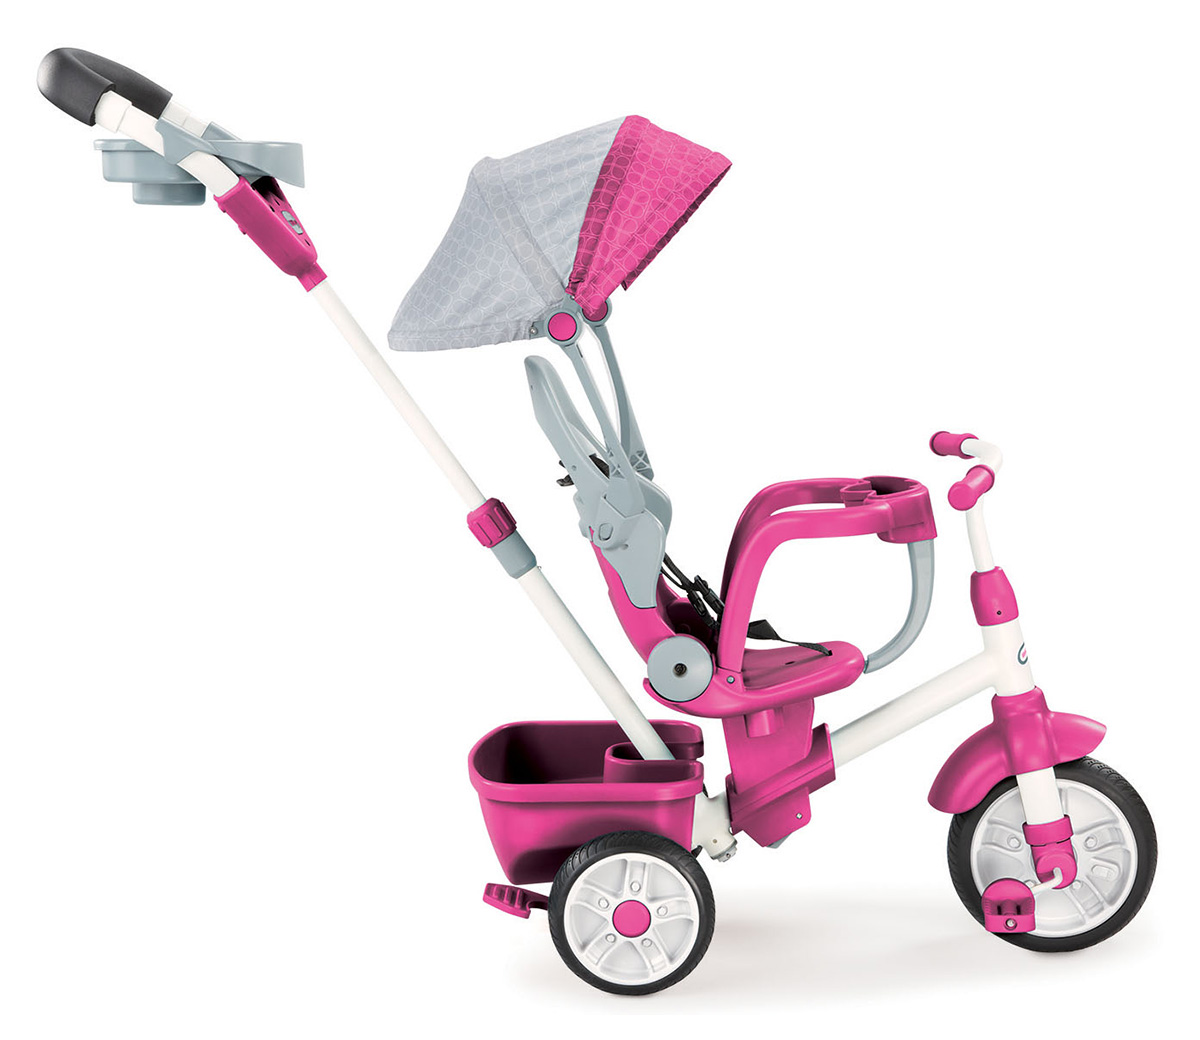 Perfect-Fit-4-in-1-Trike-pink-1-1